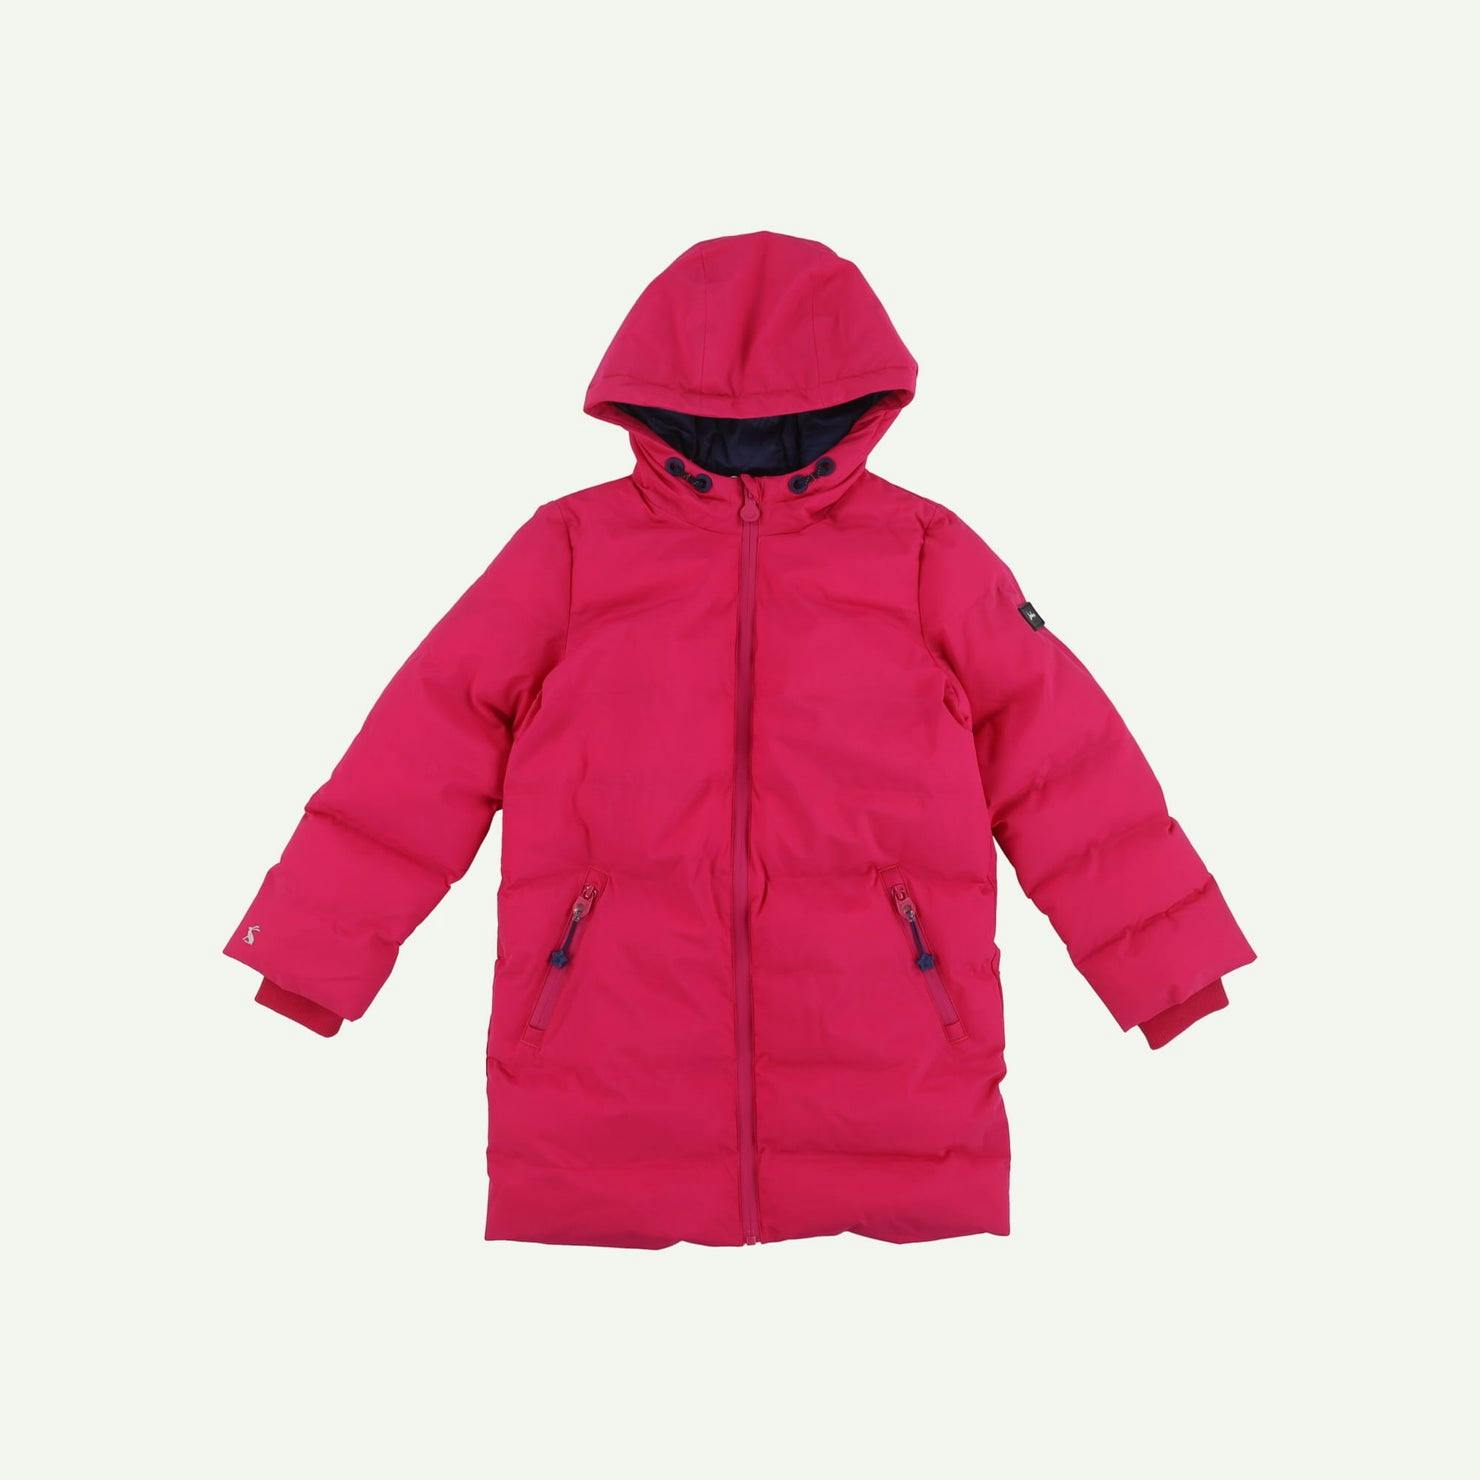 Joules As new Pink Coat